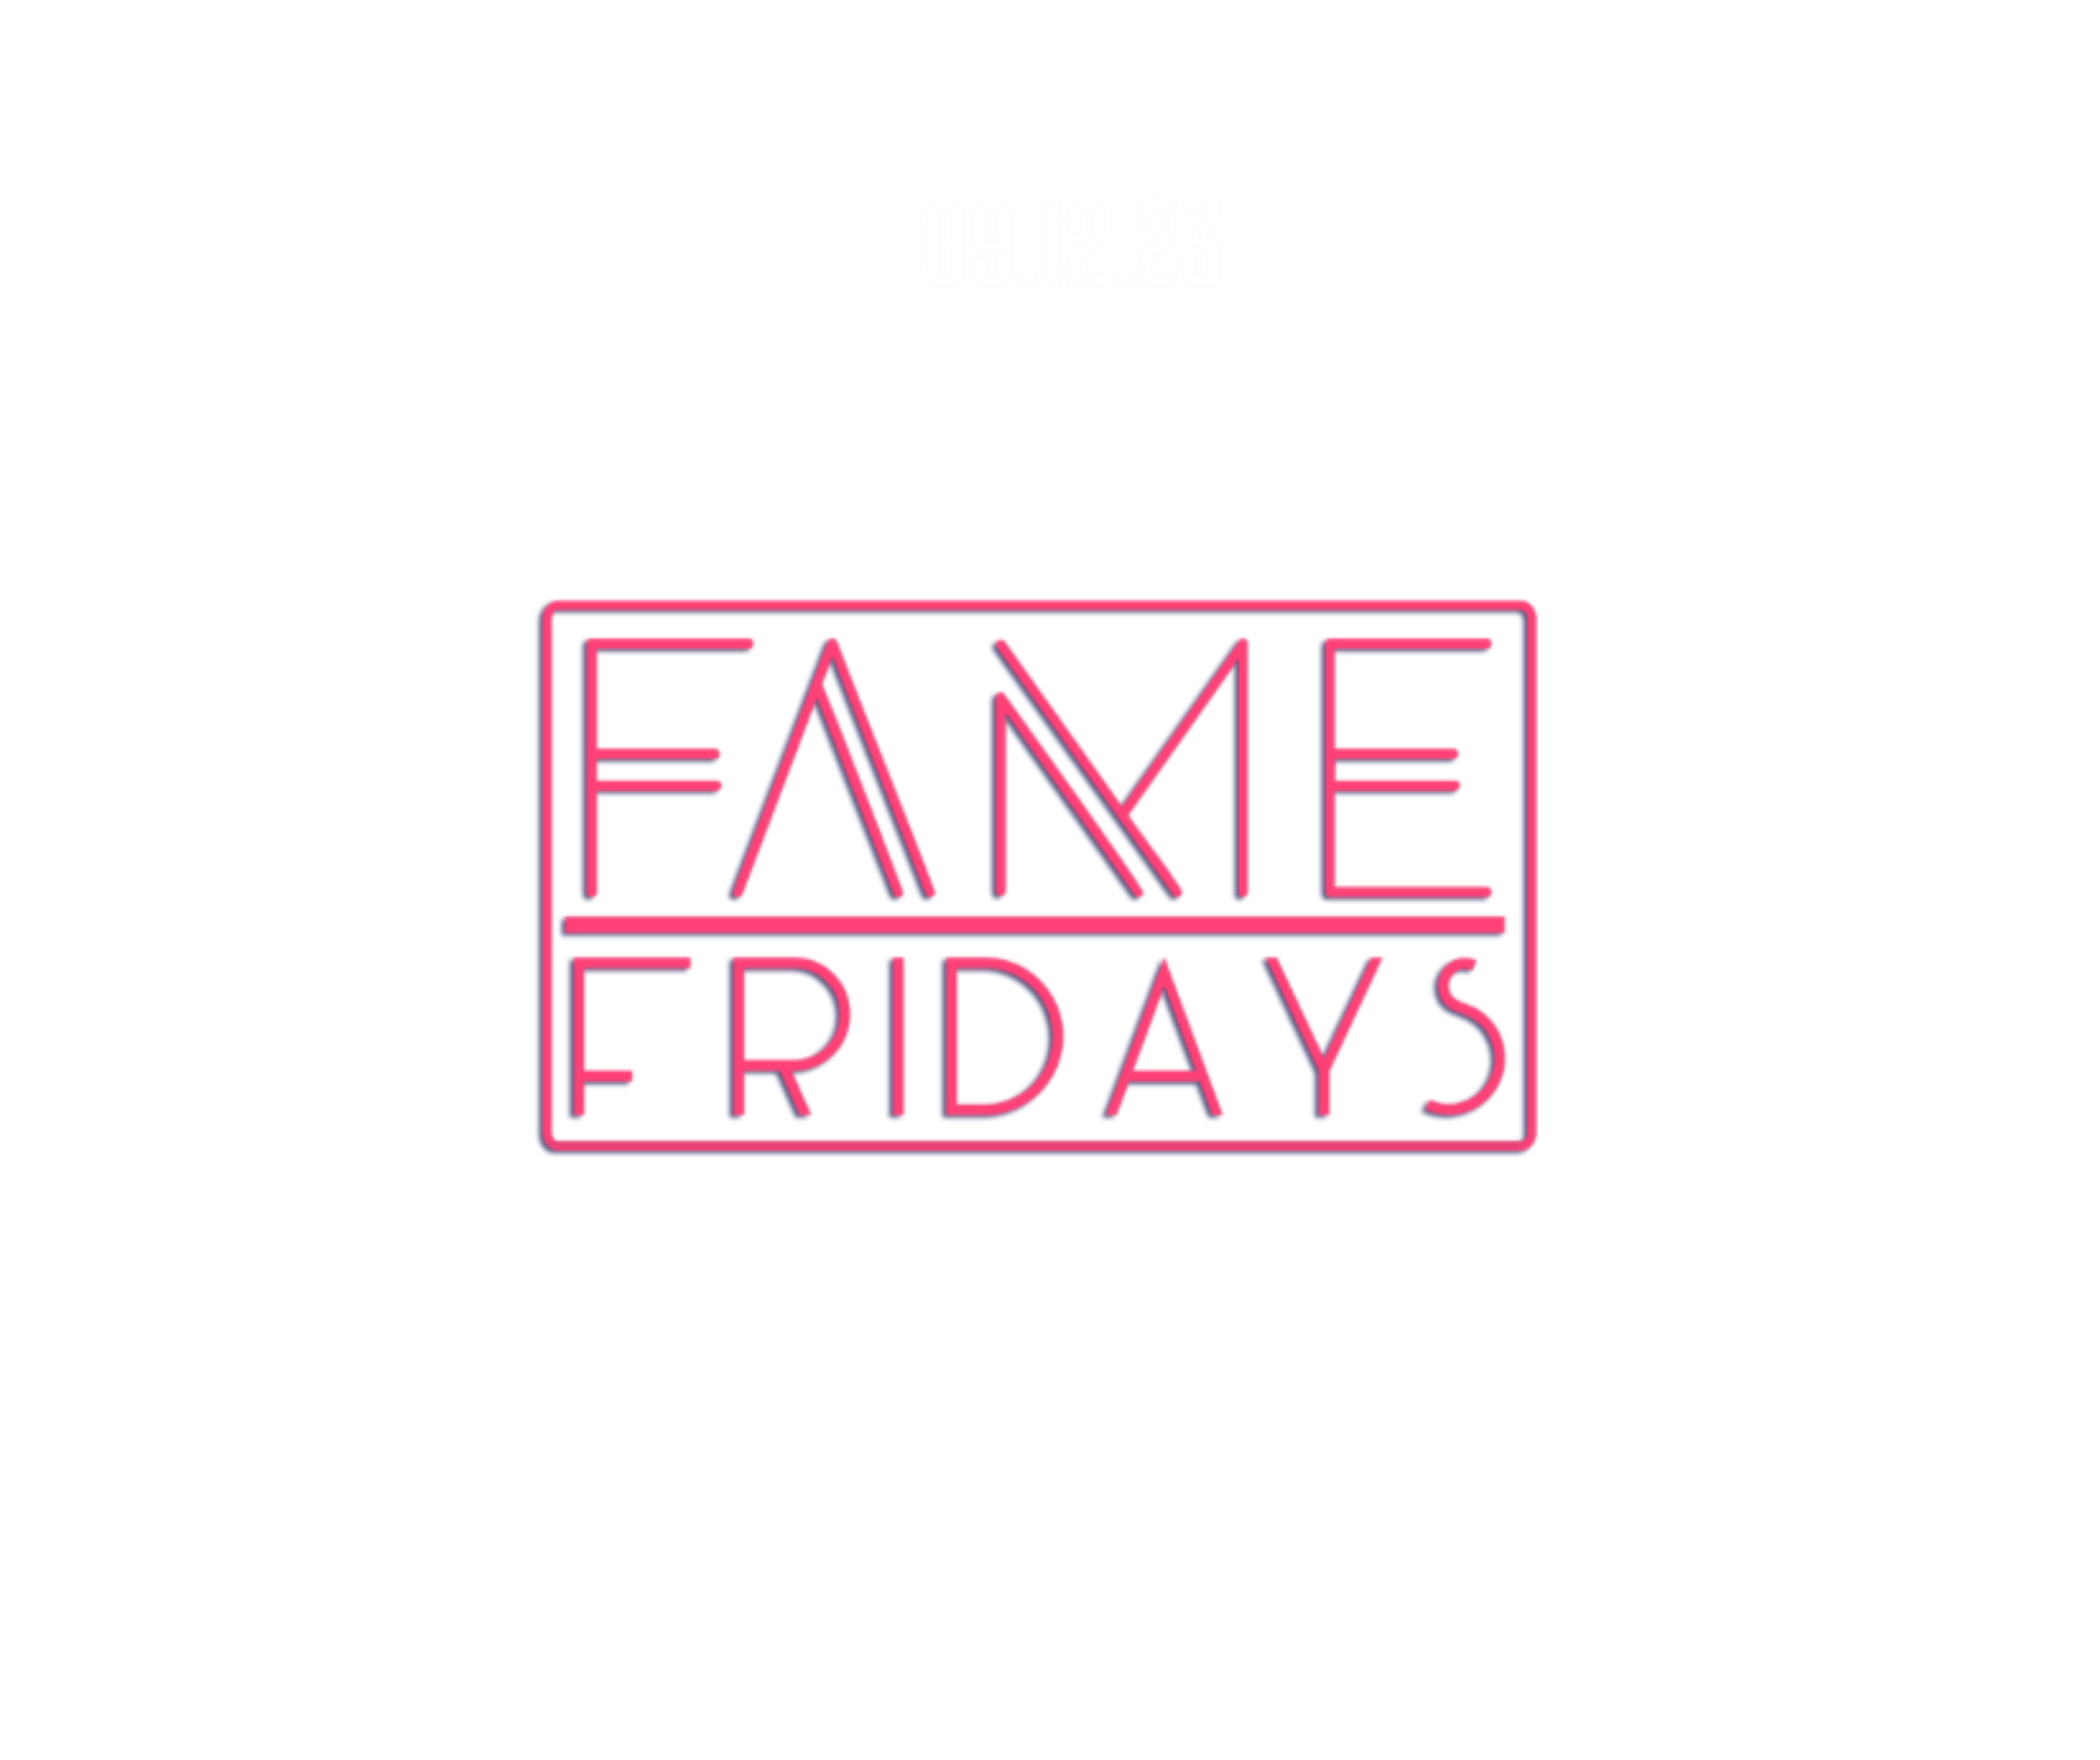 FAME FRIDAYS – PAY WEEKEND!